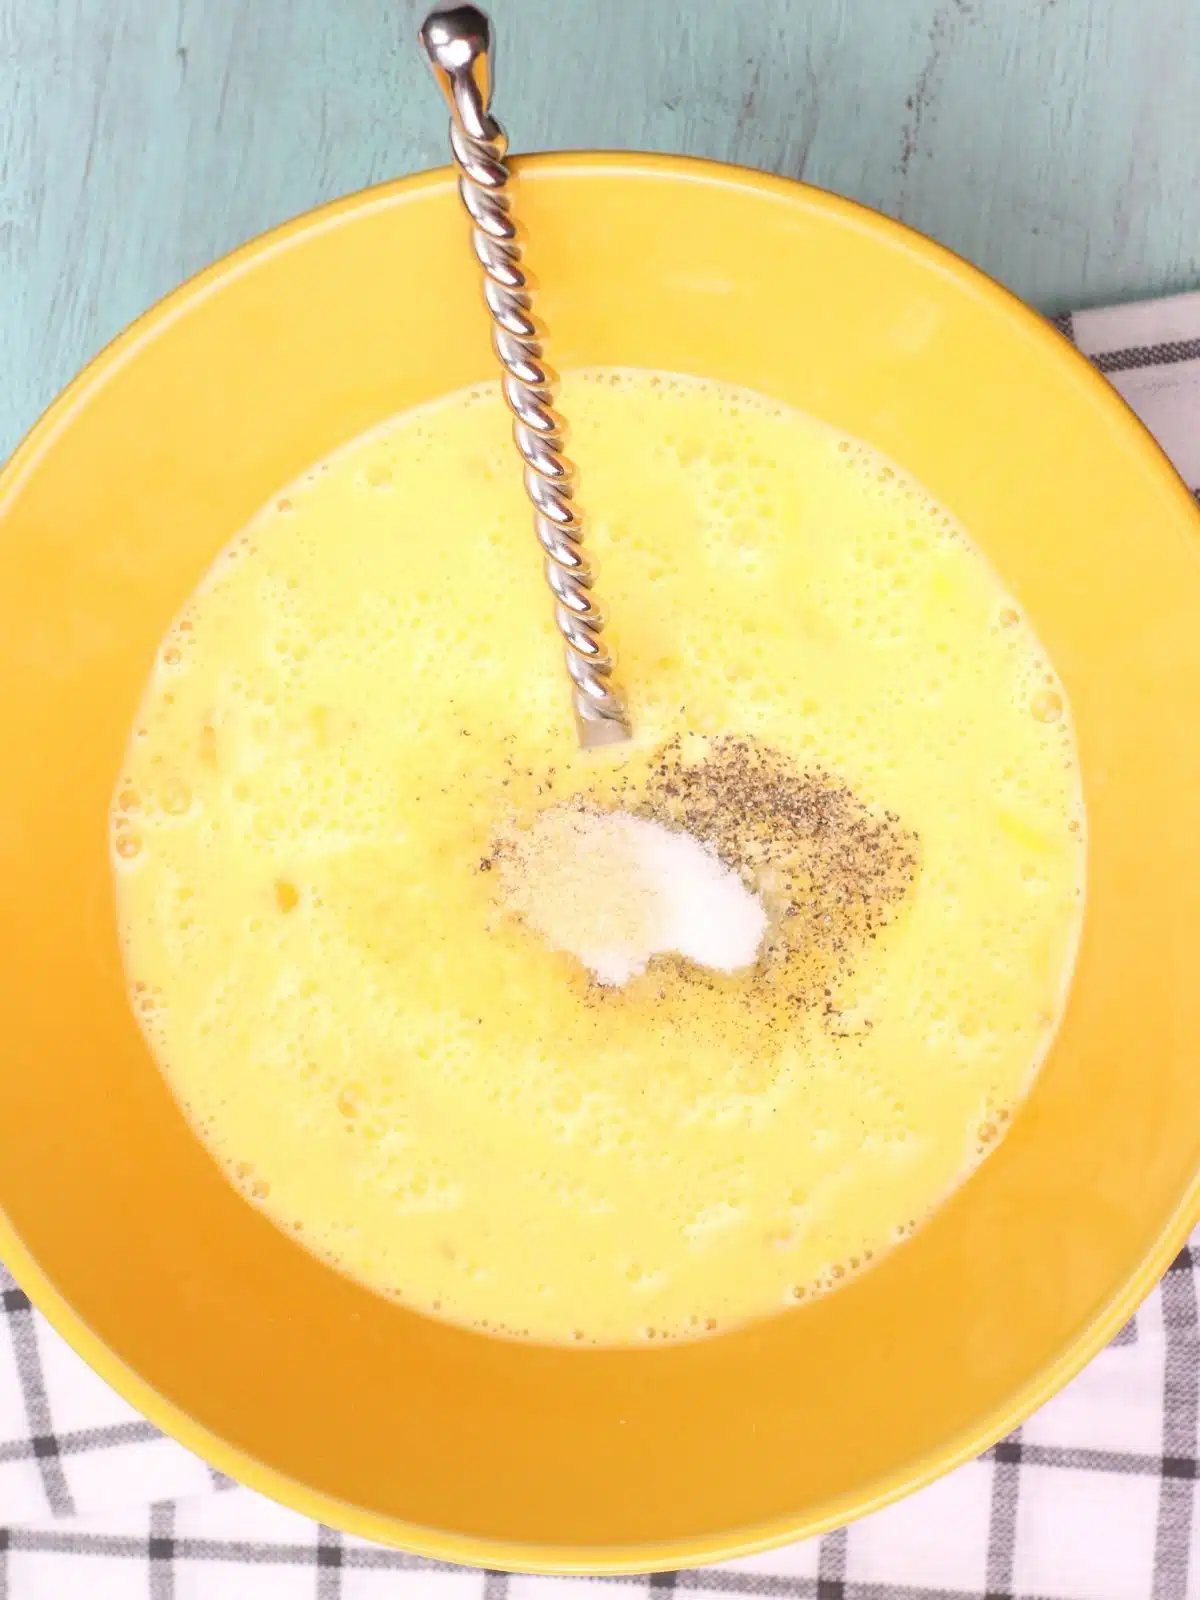 egg mixture in yellow bowl.